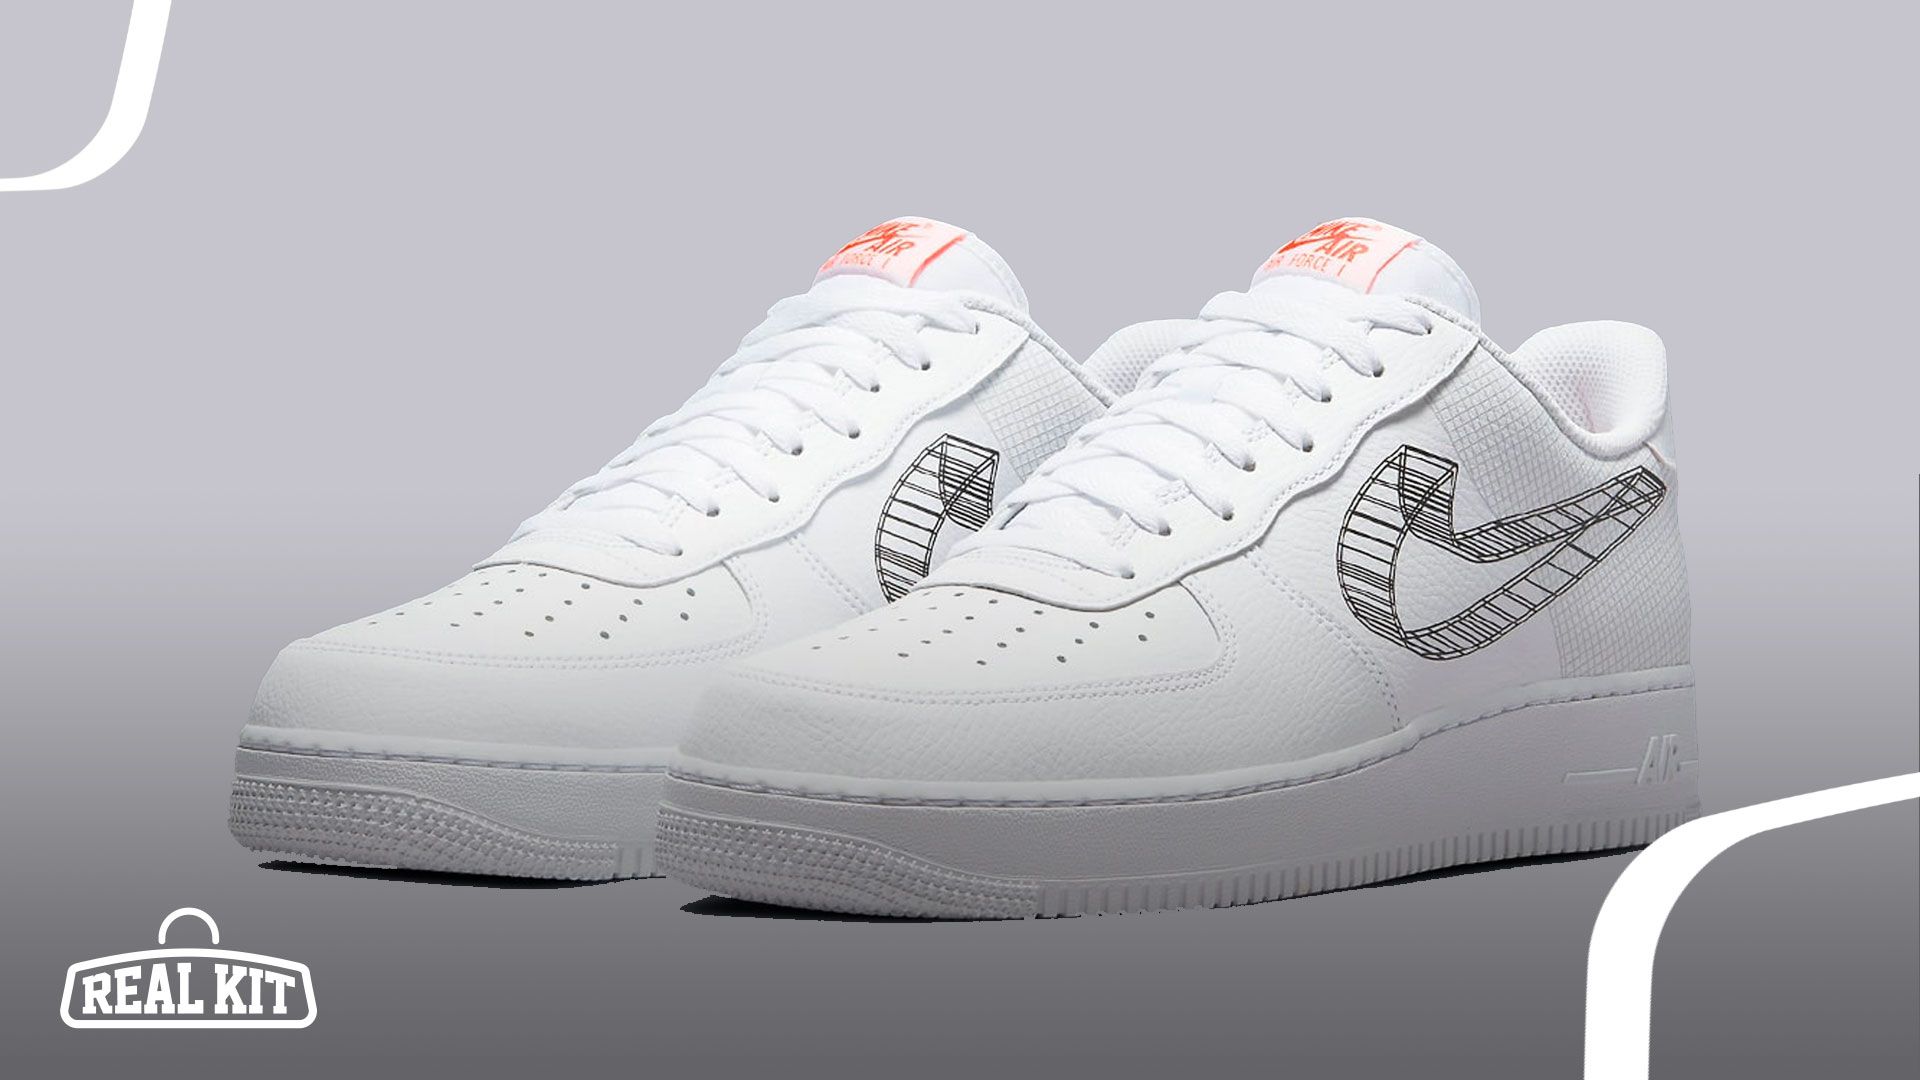 Nike Air Force 1 3D Swoosh OUT NOW: Release Date, Price, And Where ... عصير عنب راوخ